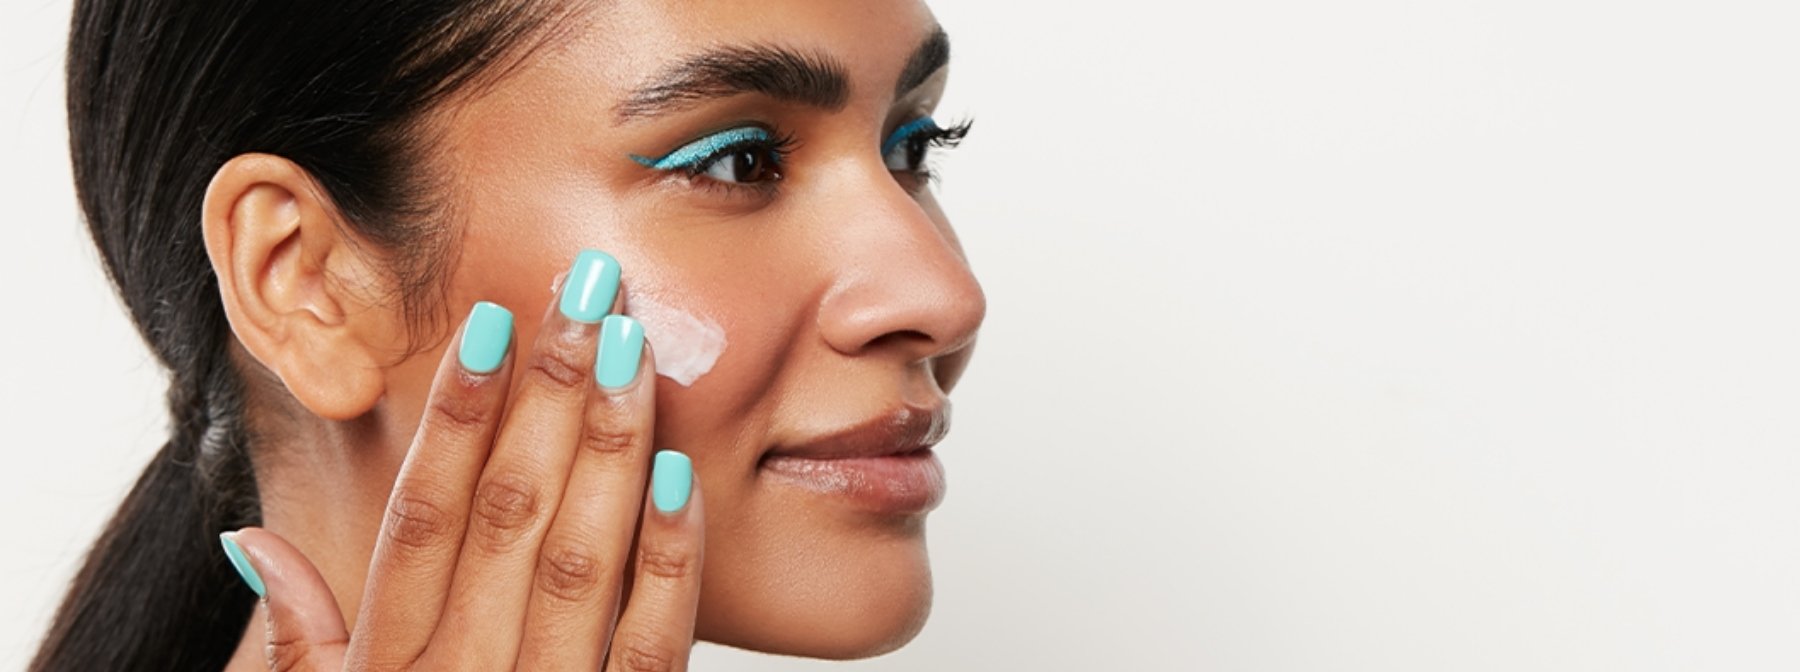 How to Reduce the Appearance of Blocked Pores